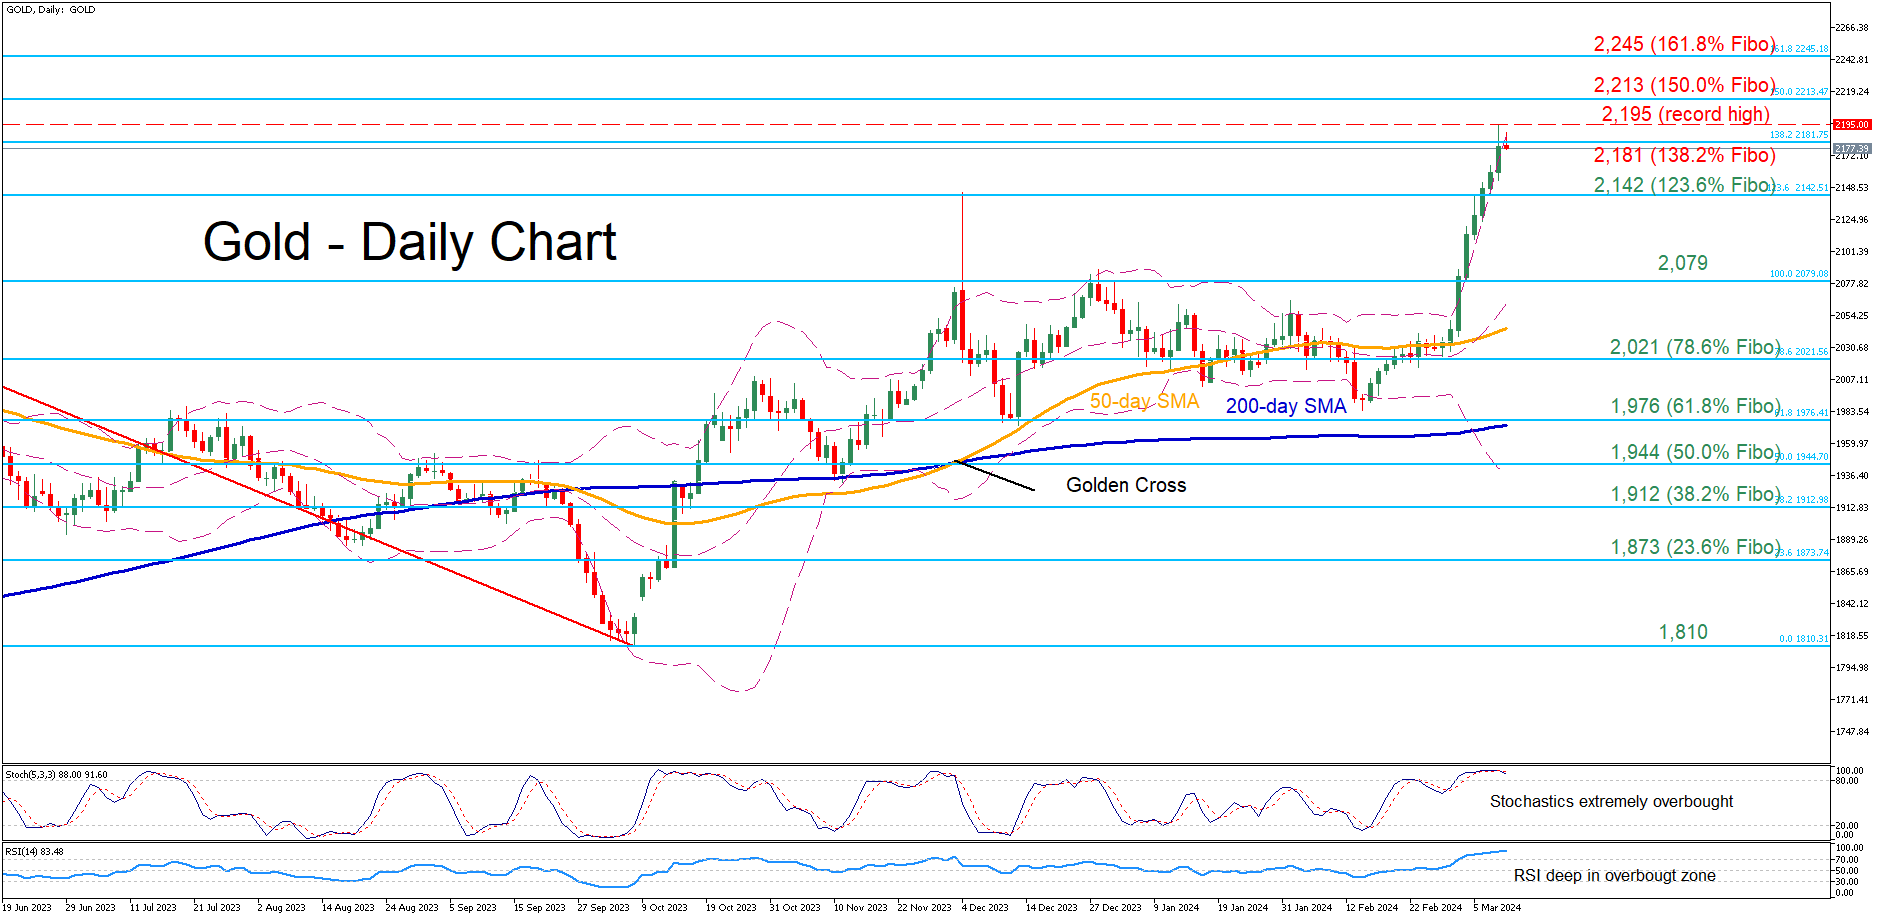 Technical Analysis – Gold marches to consecutive all-time highs